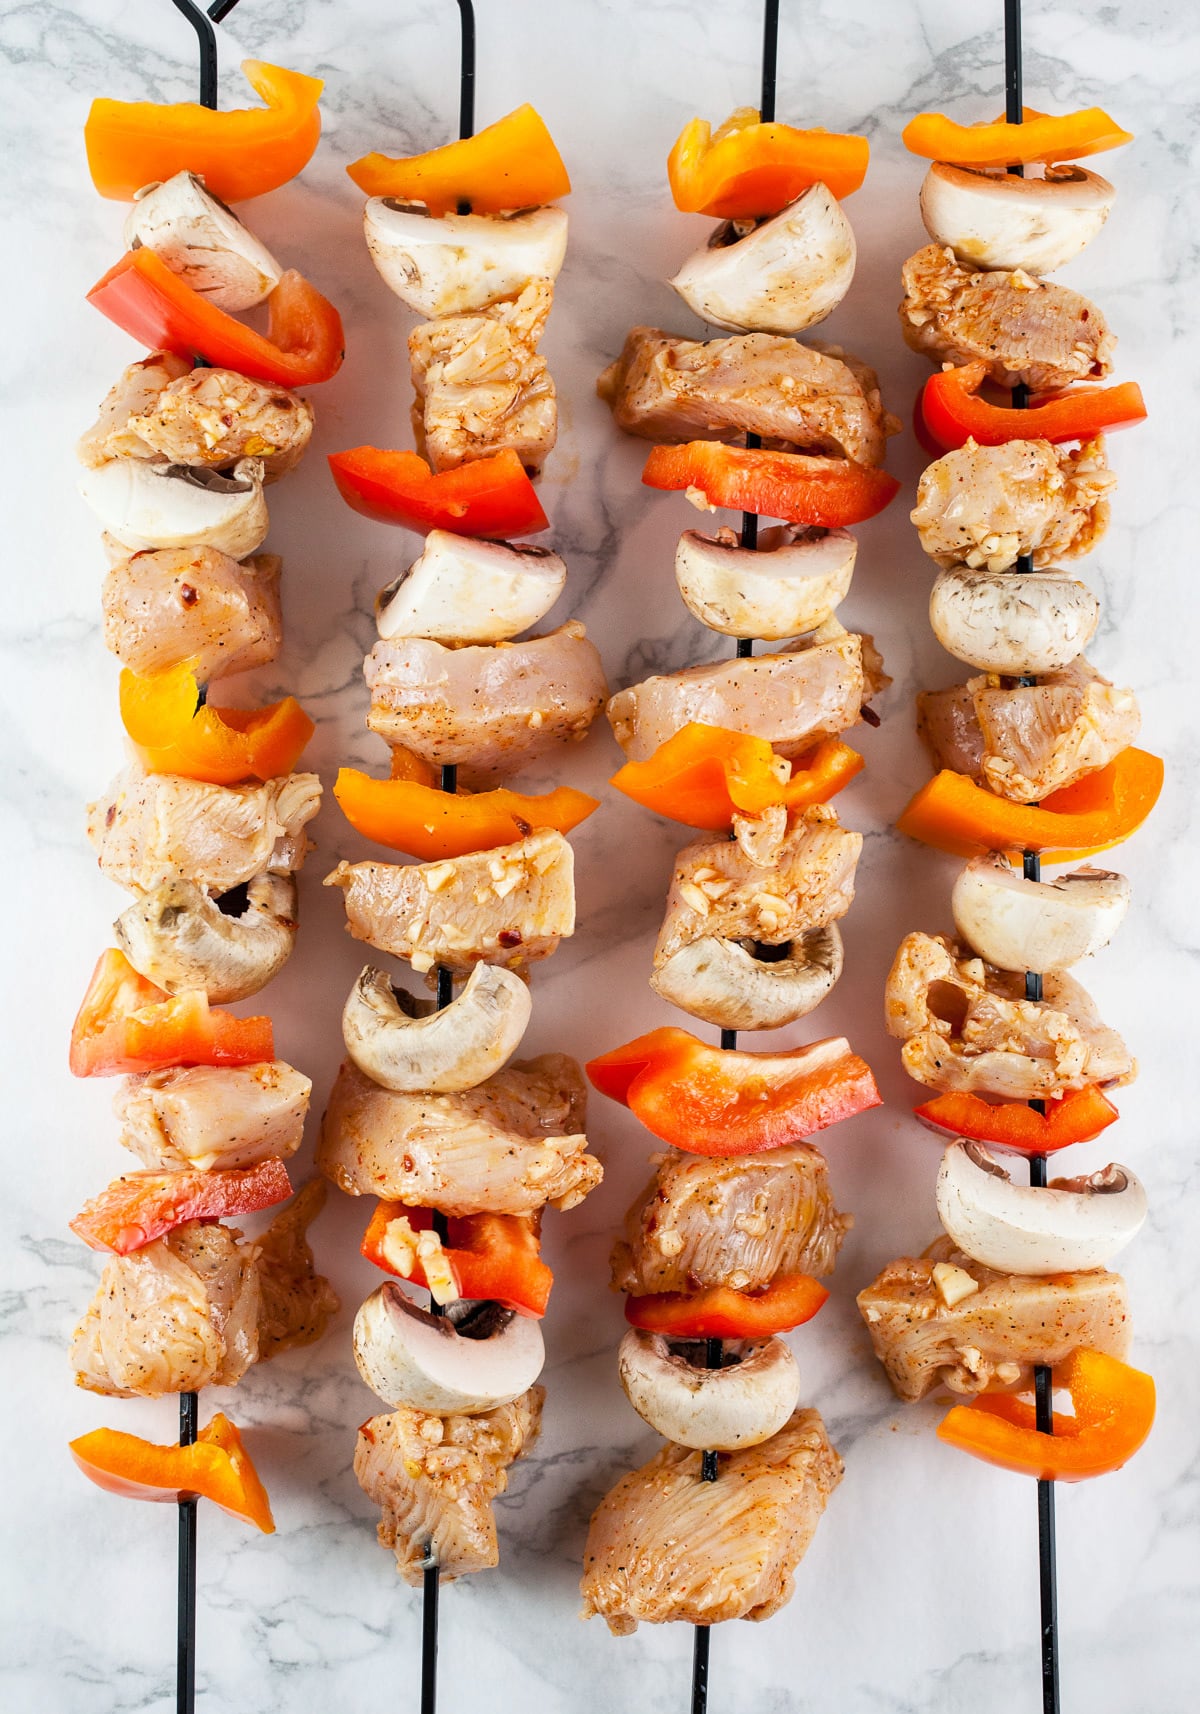 Raw chicken and uncooked bell peppers and mushrooms on metal skewers.